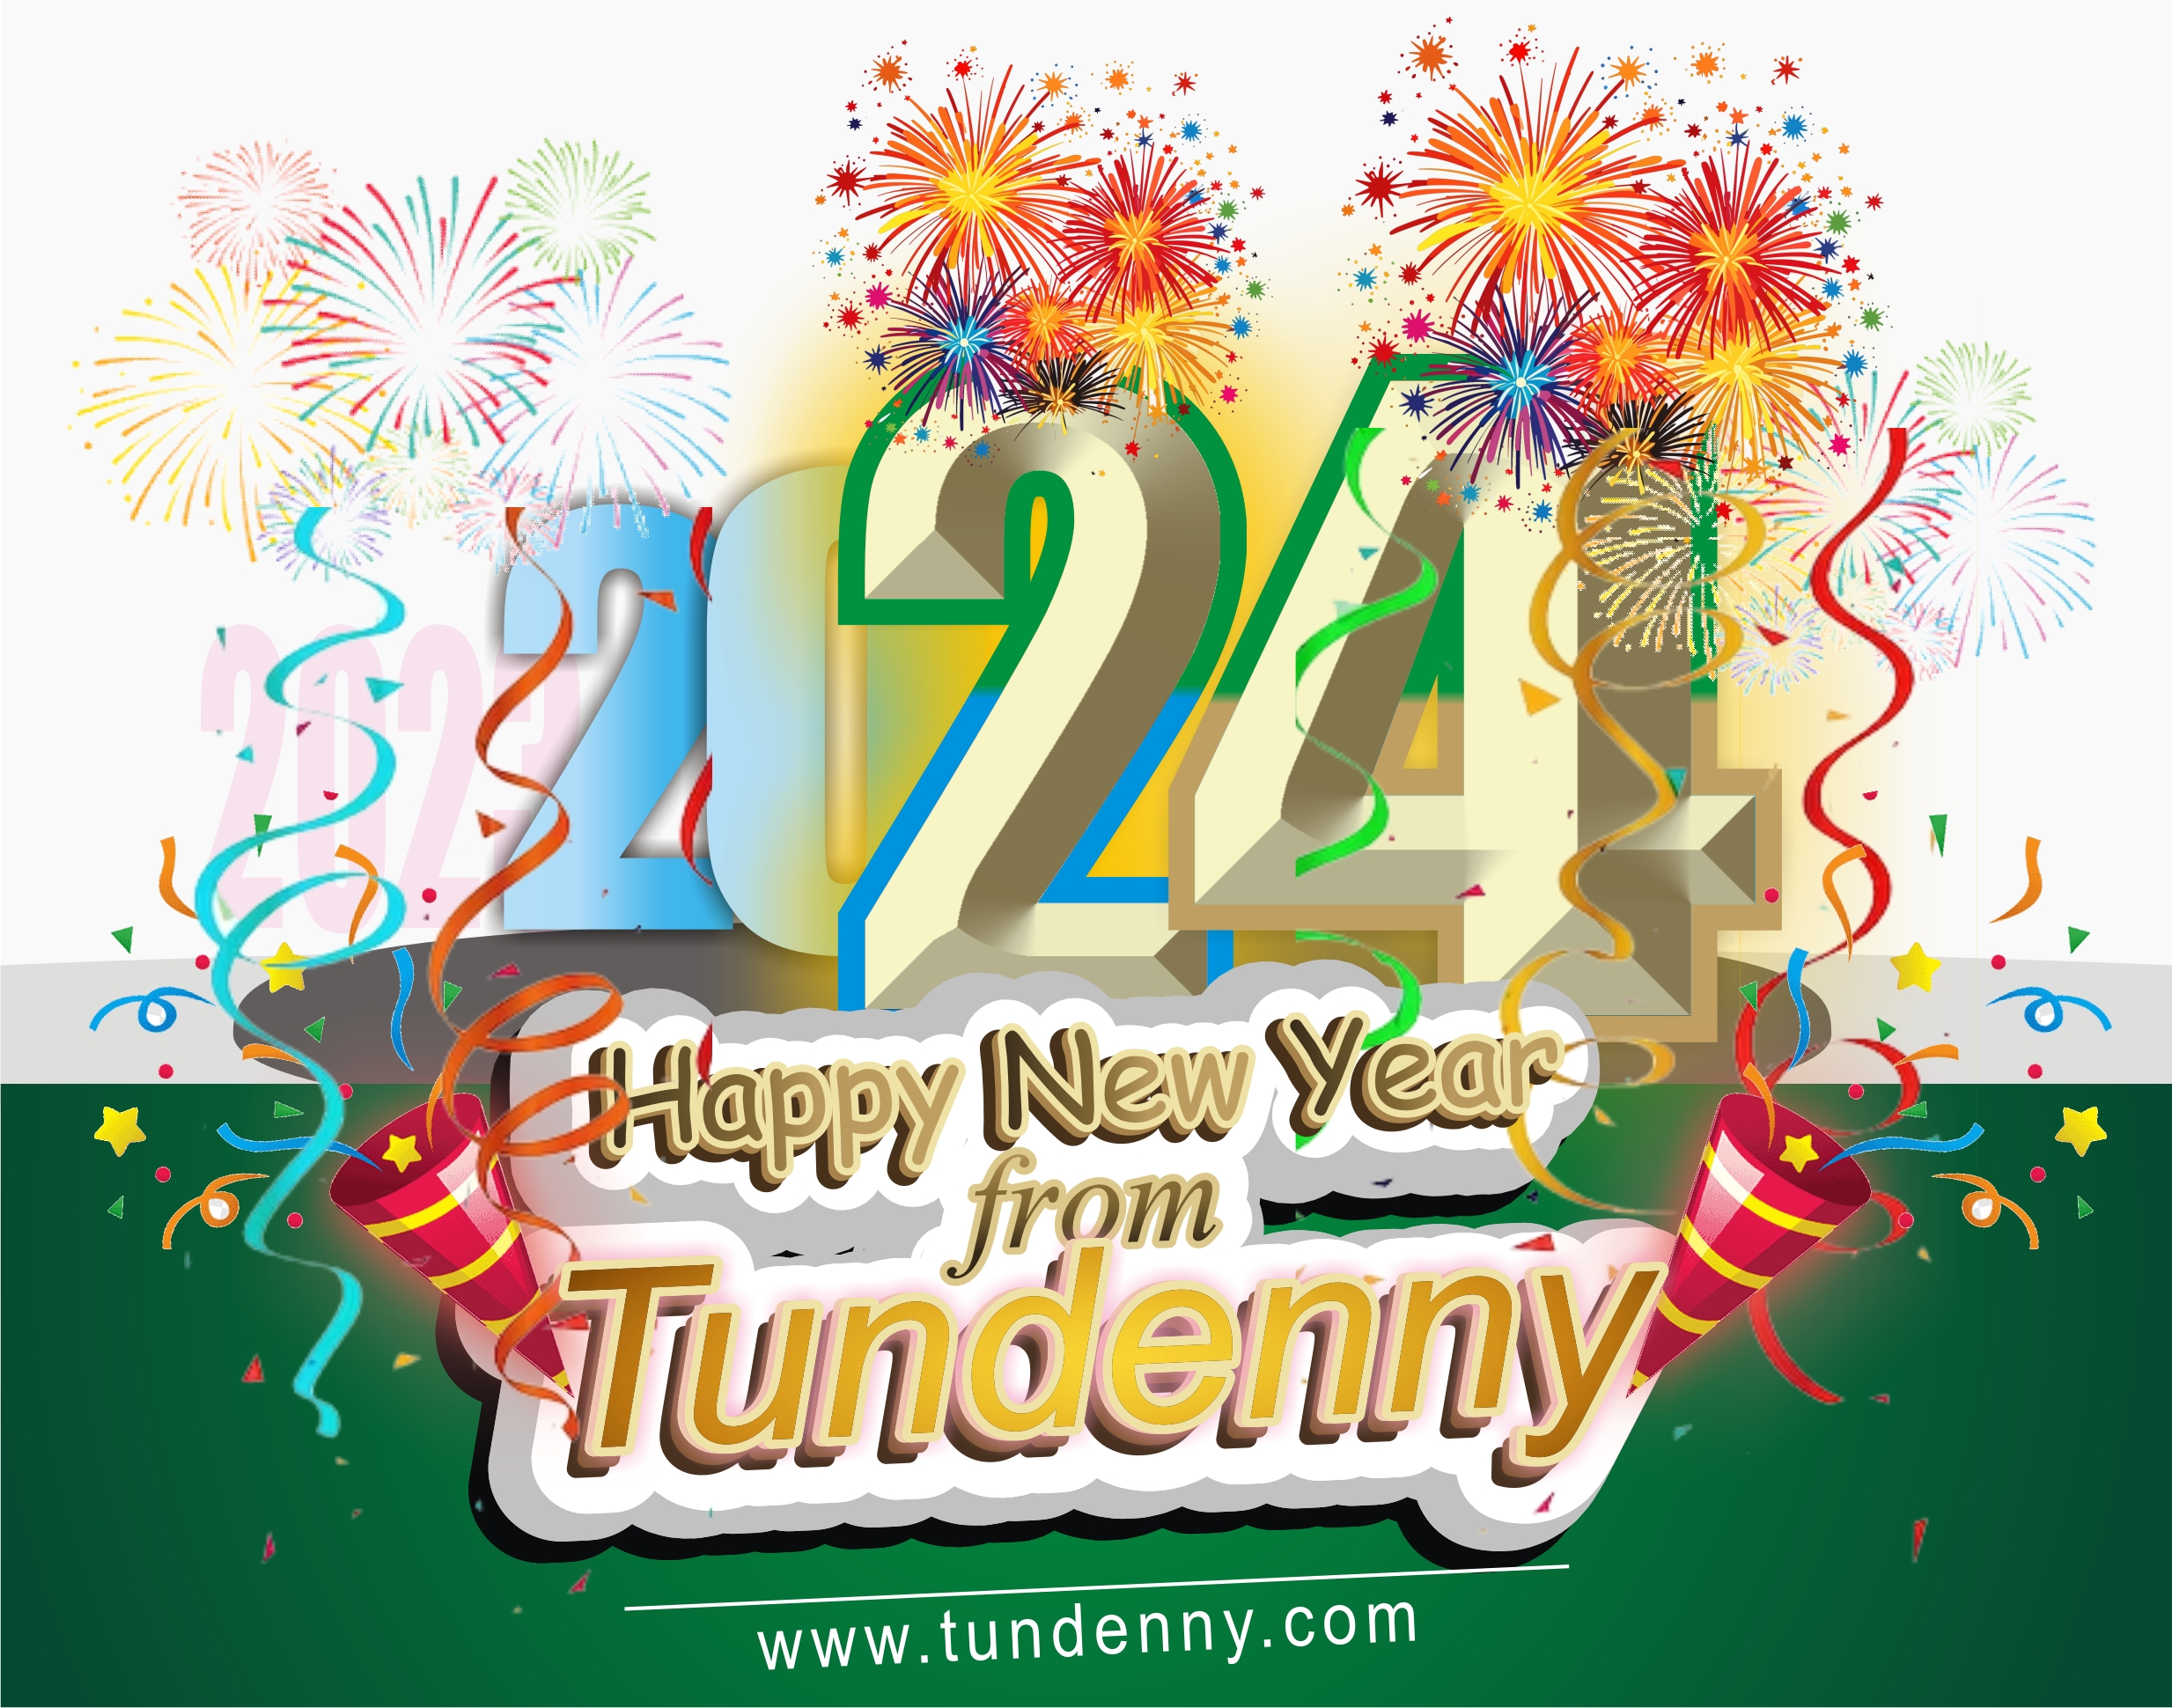 Happy New Year from Tundenny in year 2024.